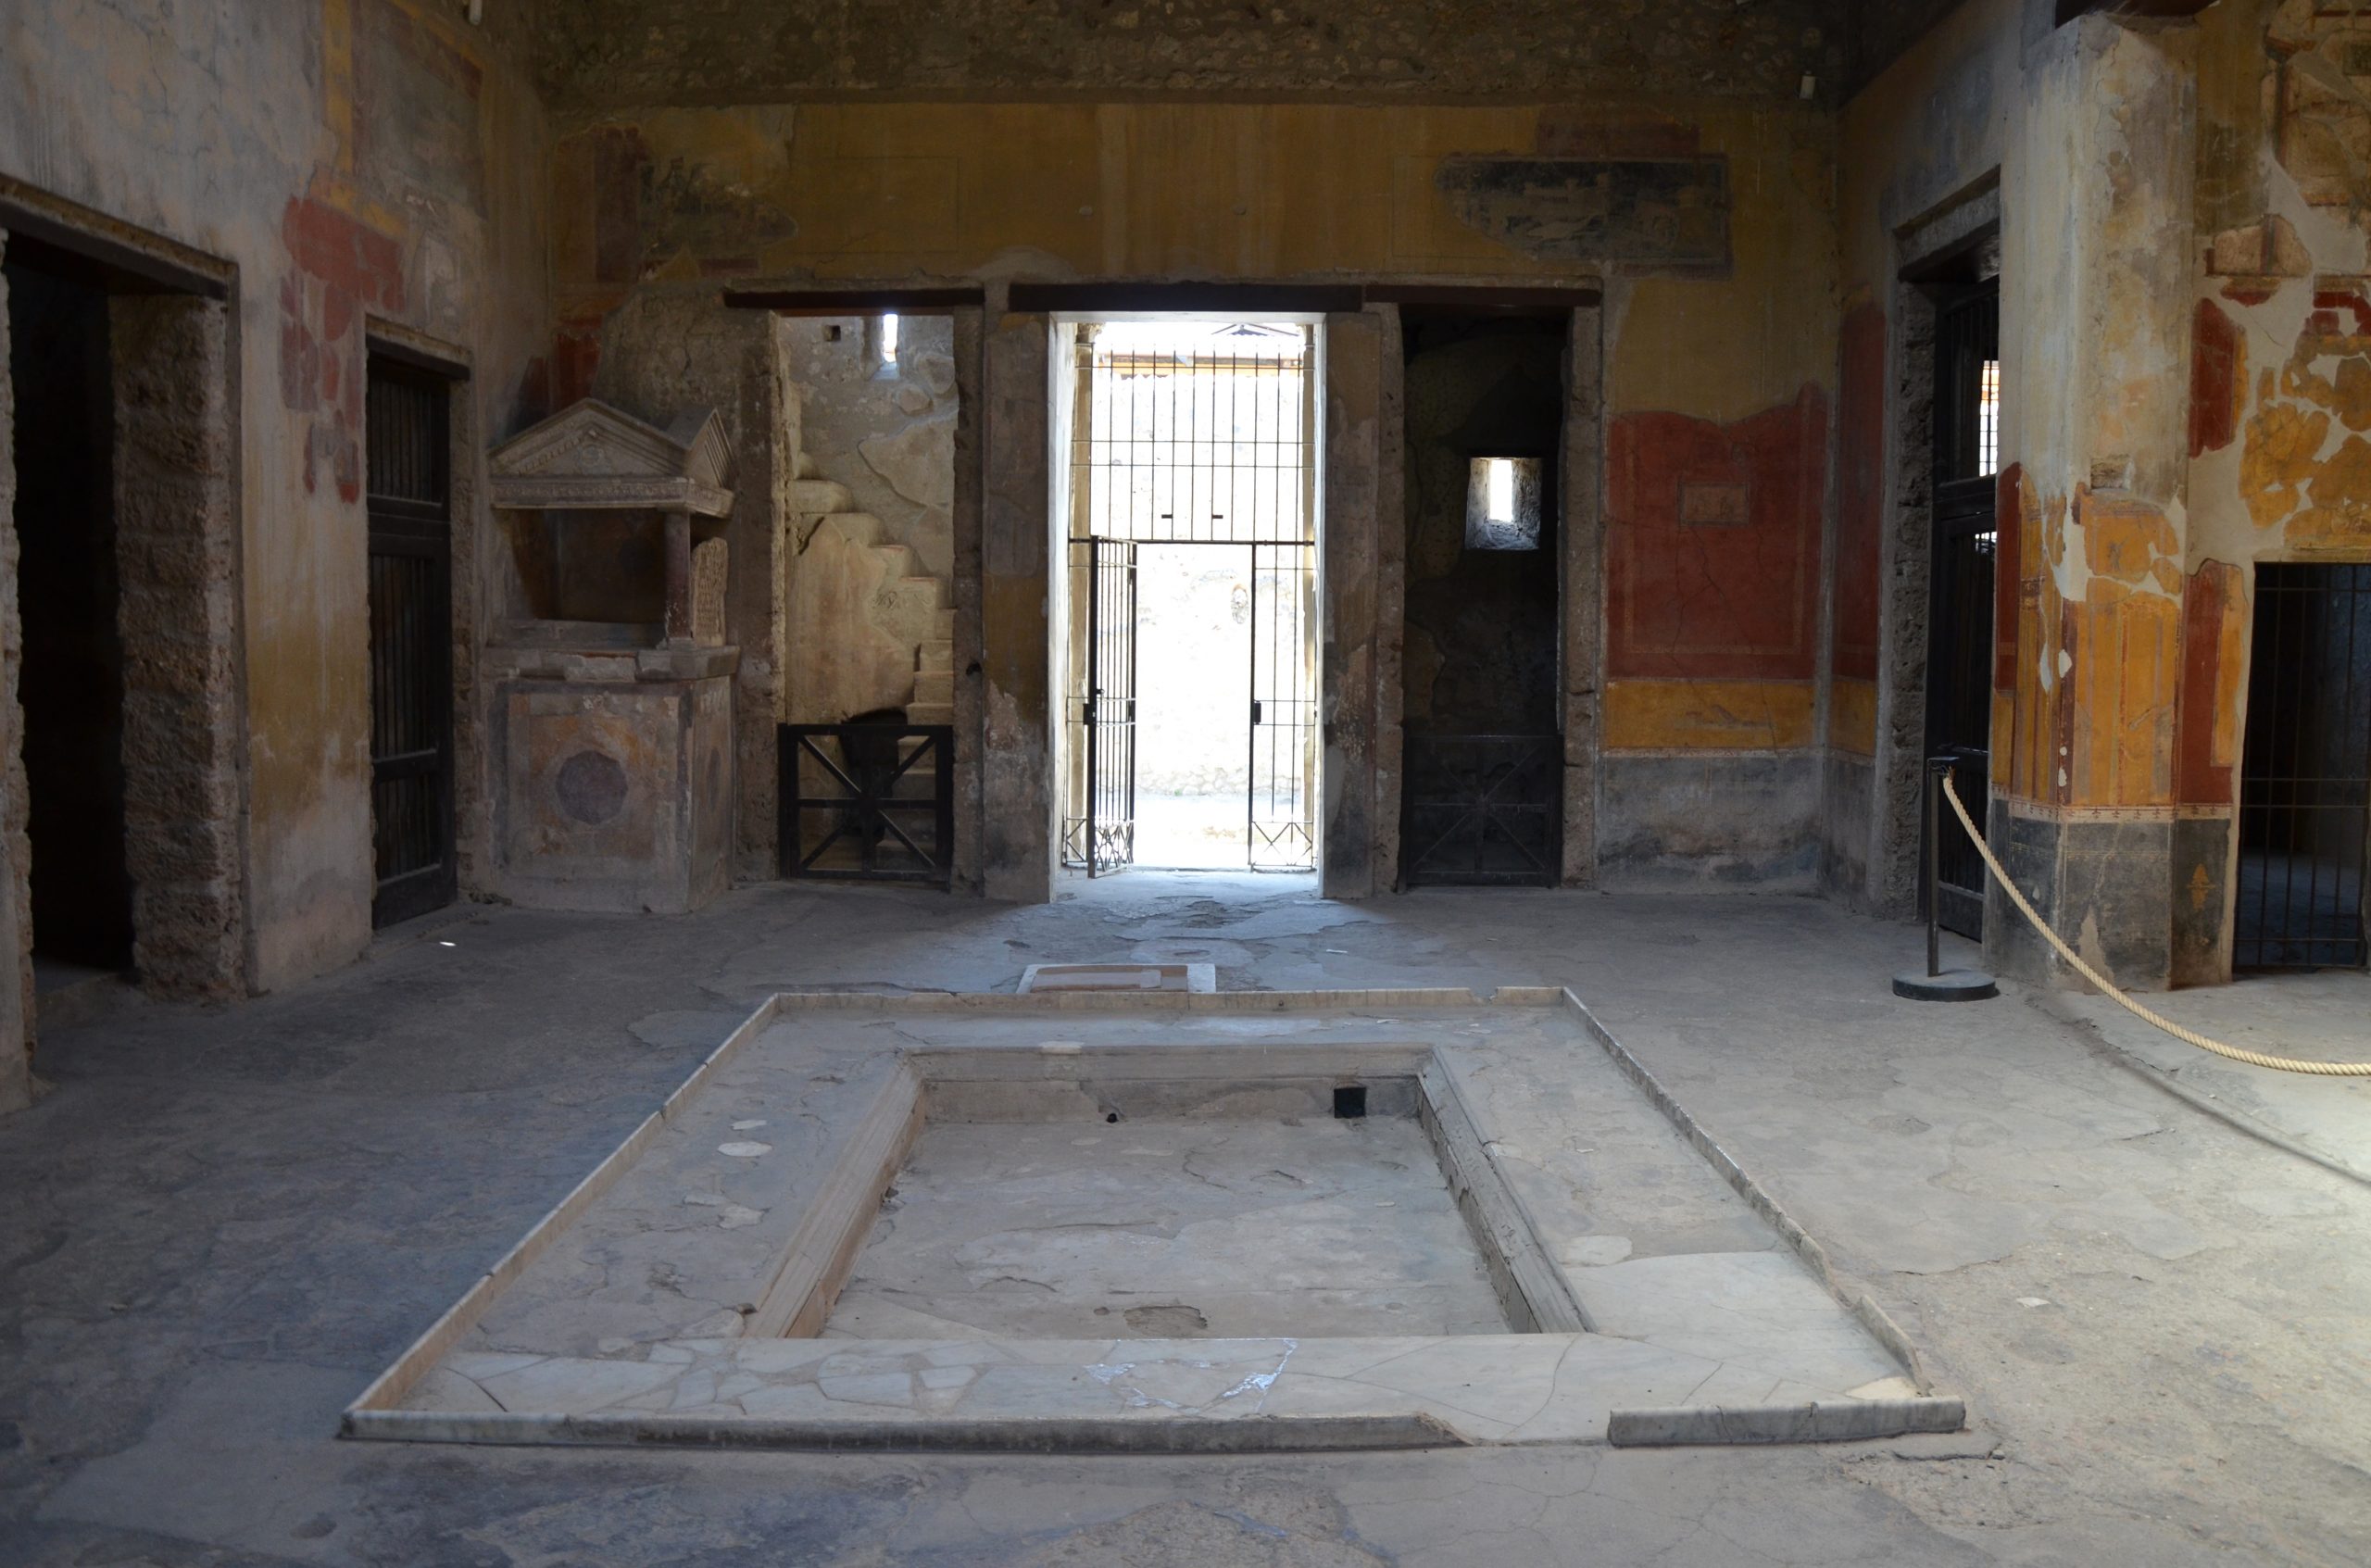 Atrium. In the far corner, a small temple-style lararium set against the wall. The centre of the floor has rectangular shallow pit.